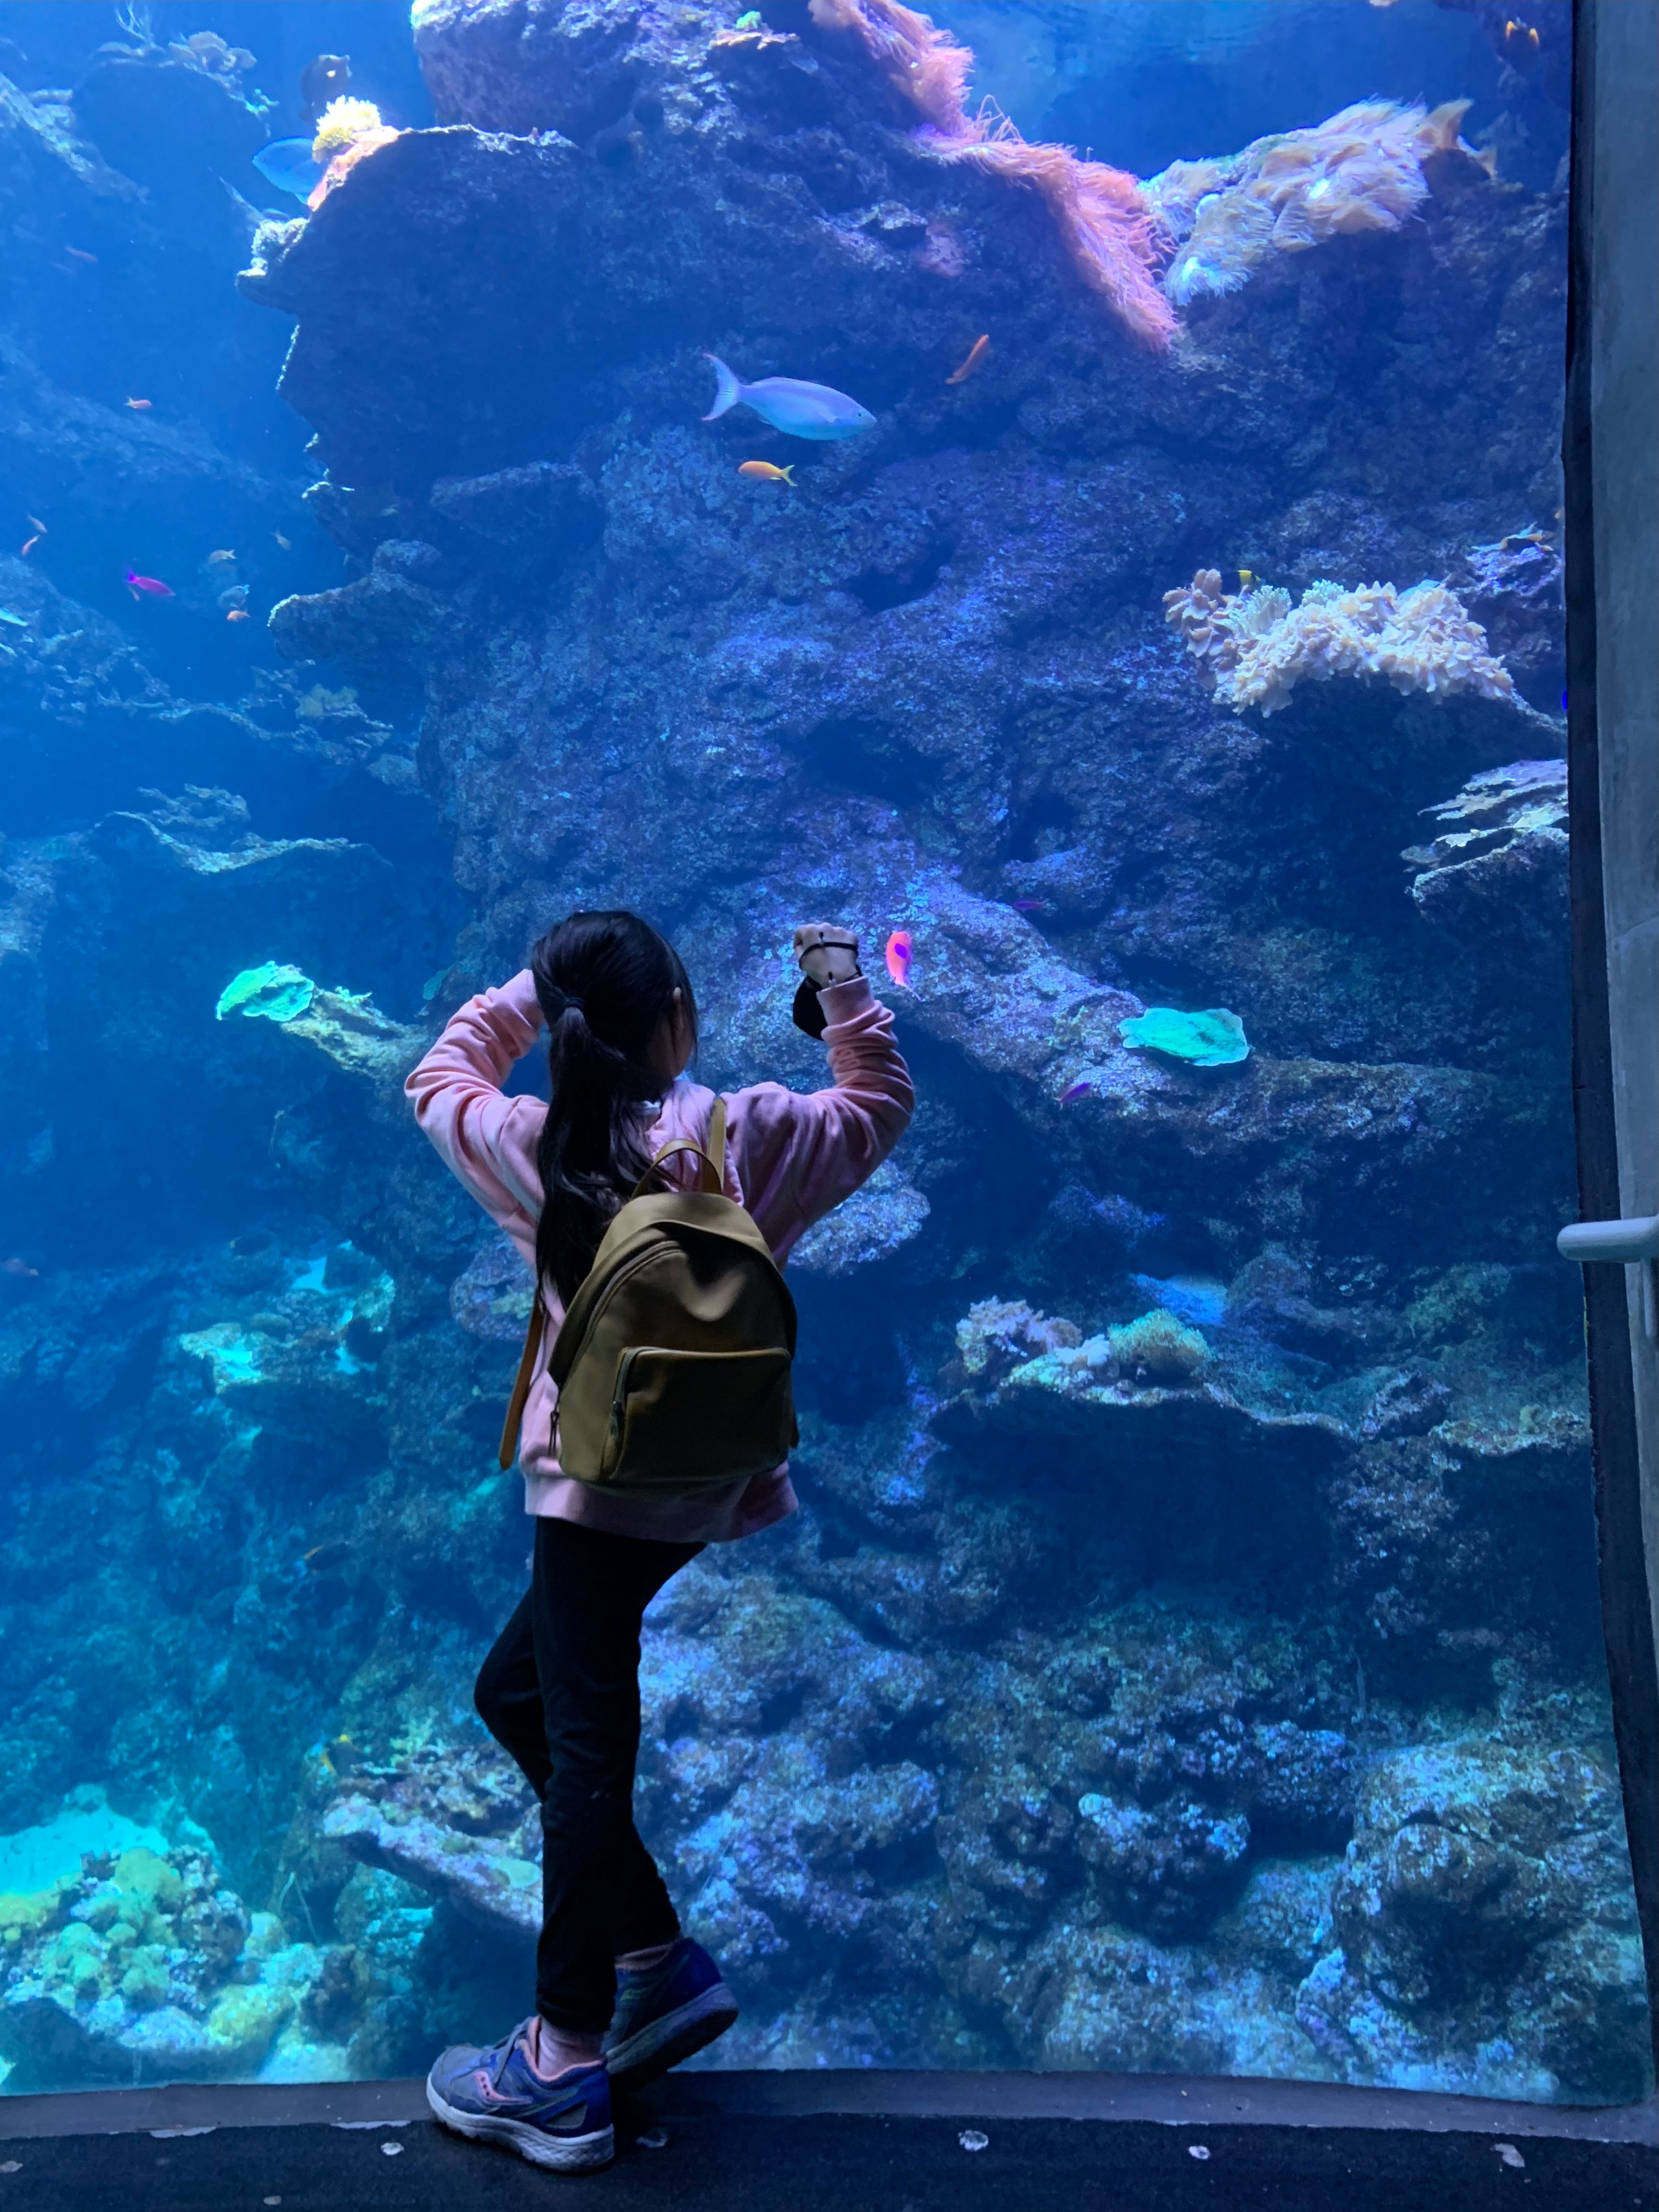 The philippine coral reef at the california academy of sciences